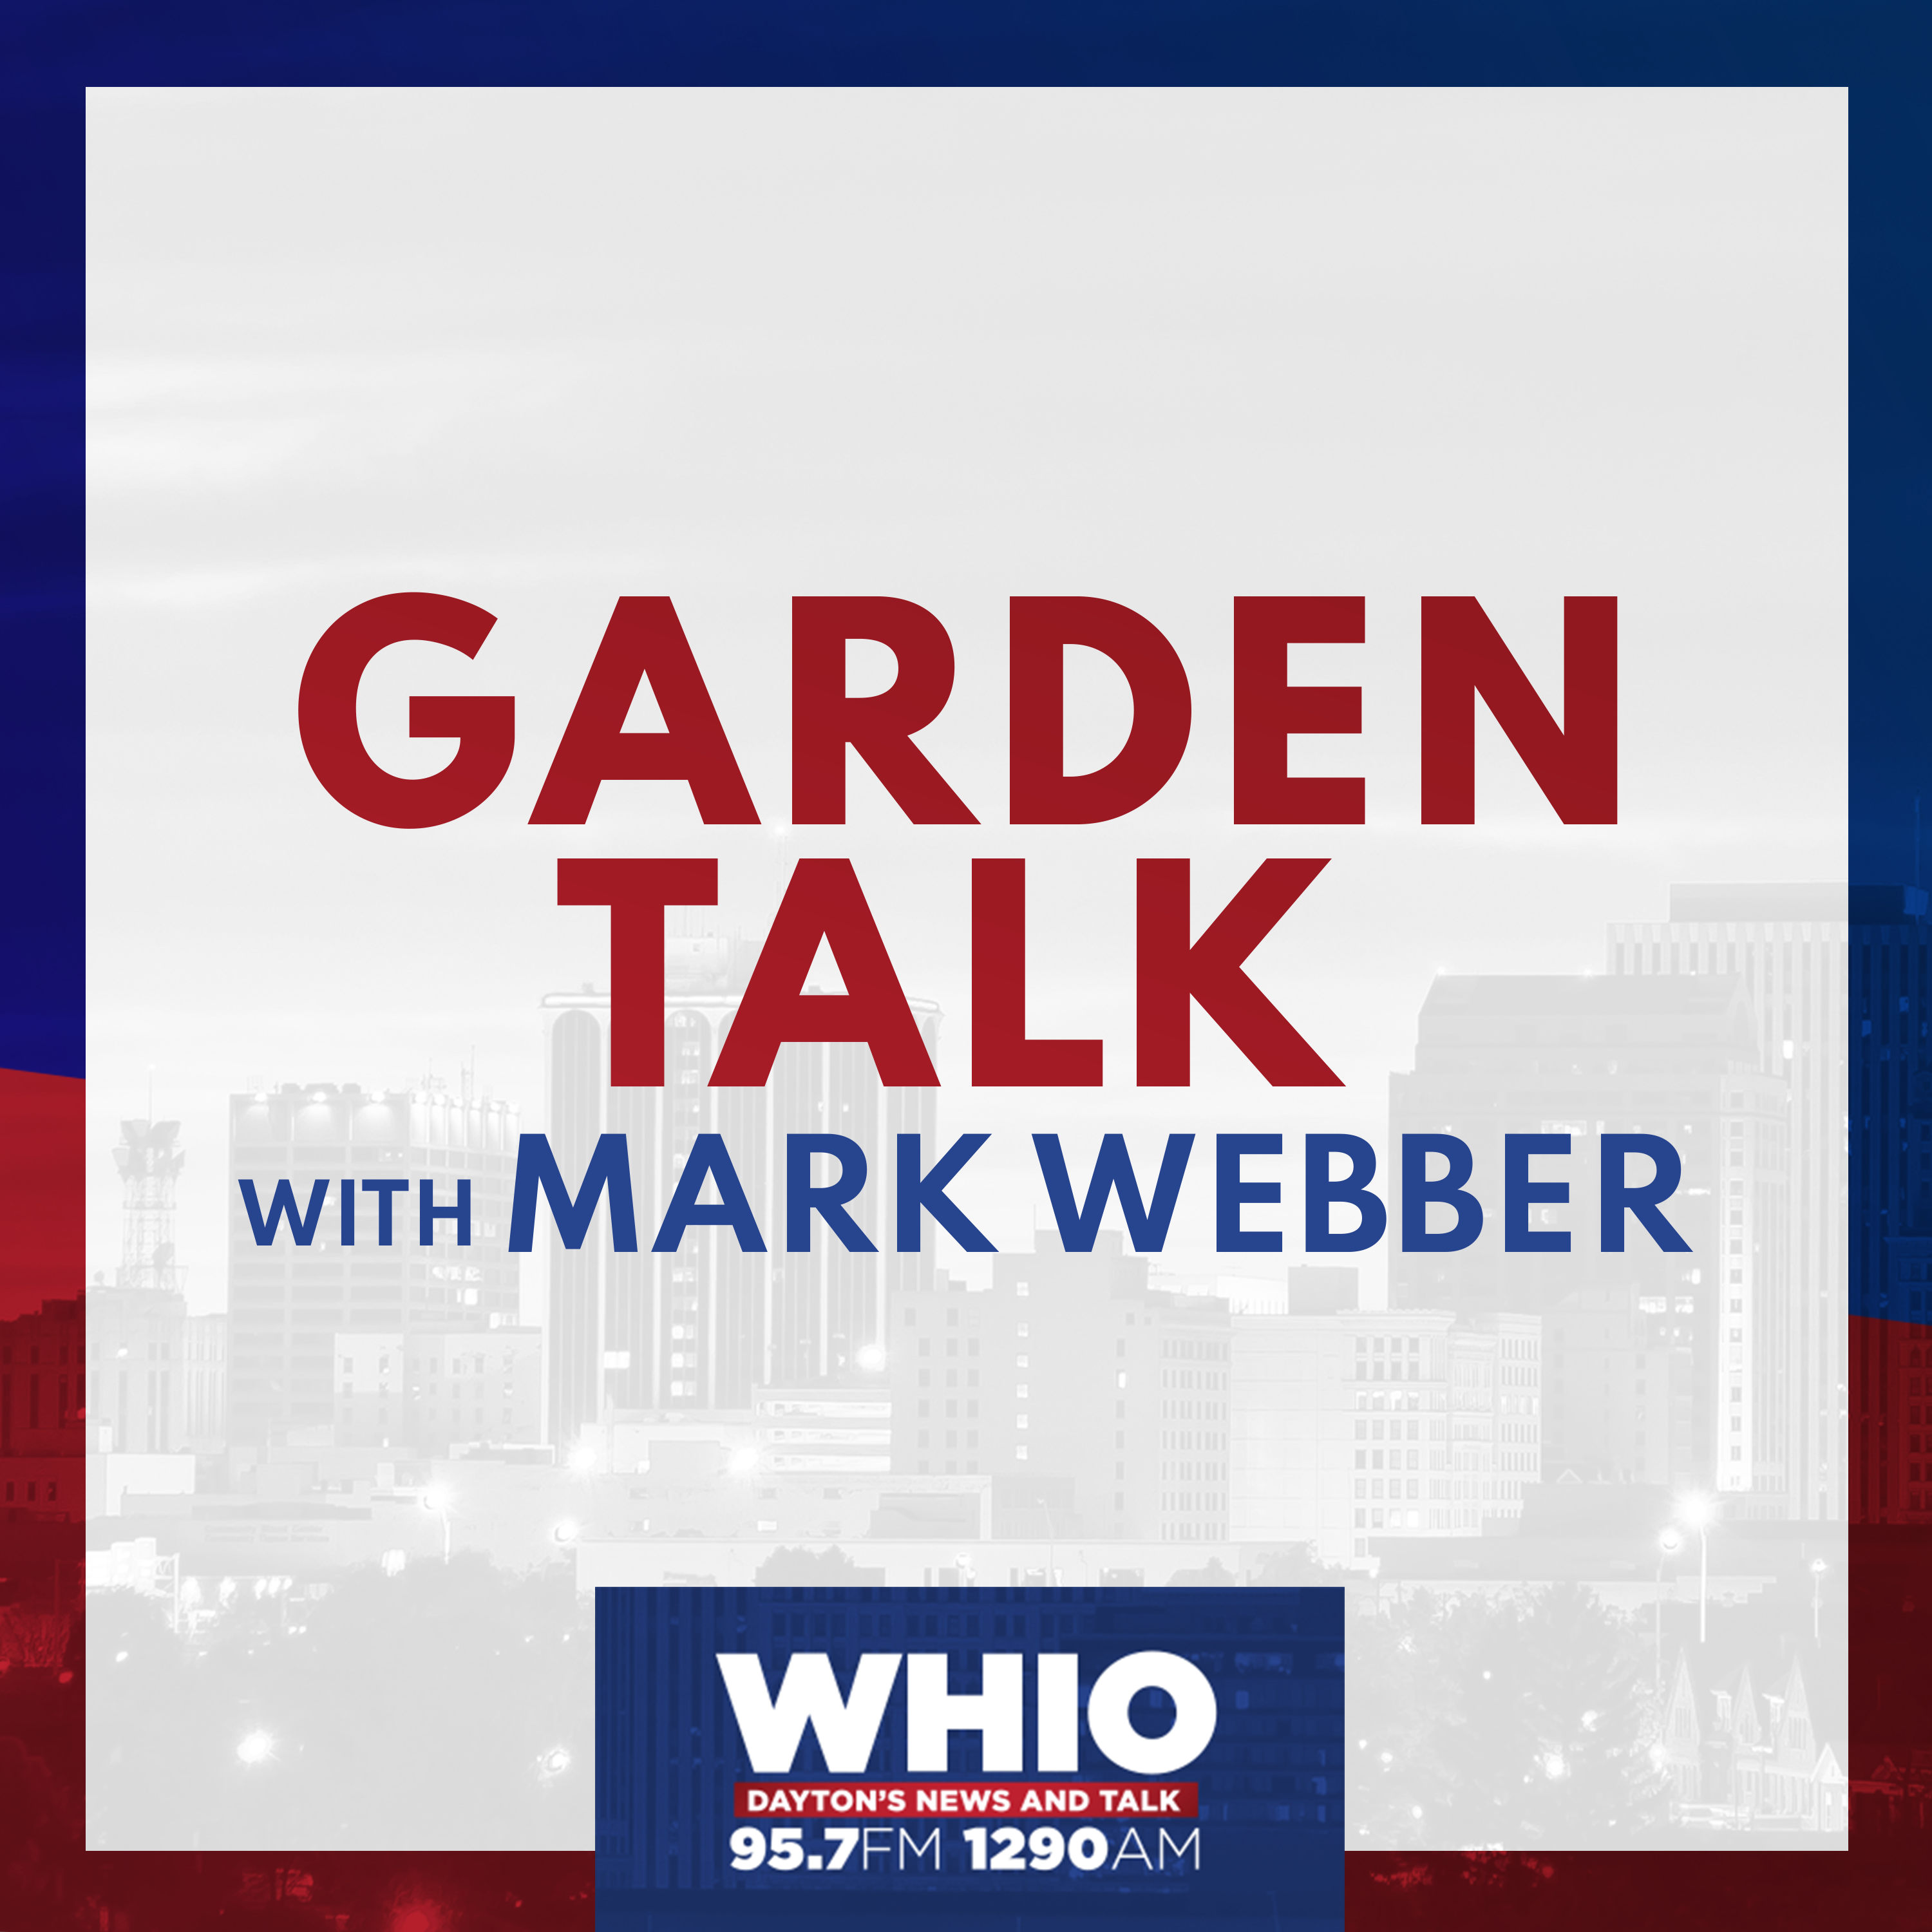 Garden Talk with Mark Webber: Hour 2 from Saturday, May 28th 2016